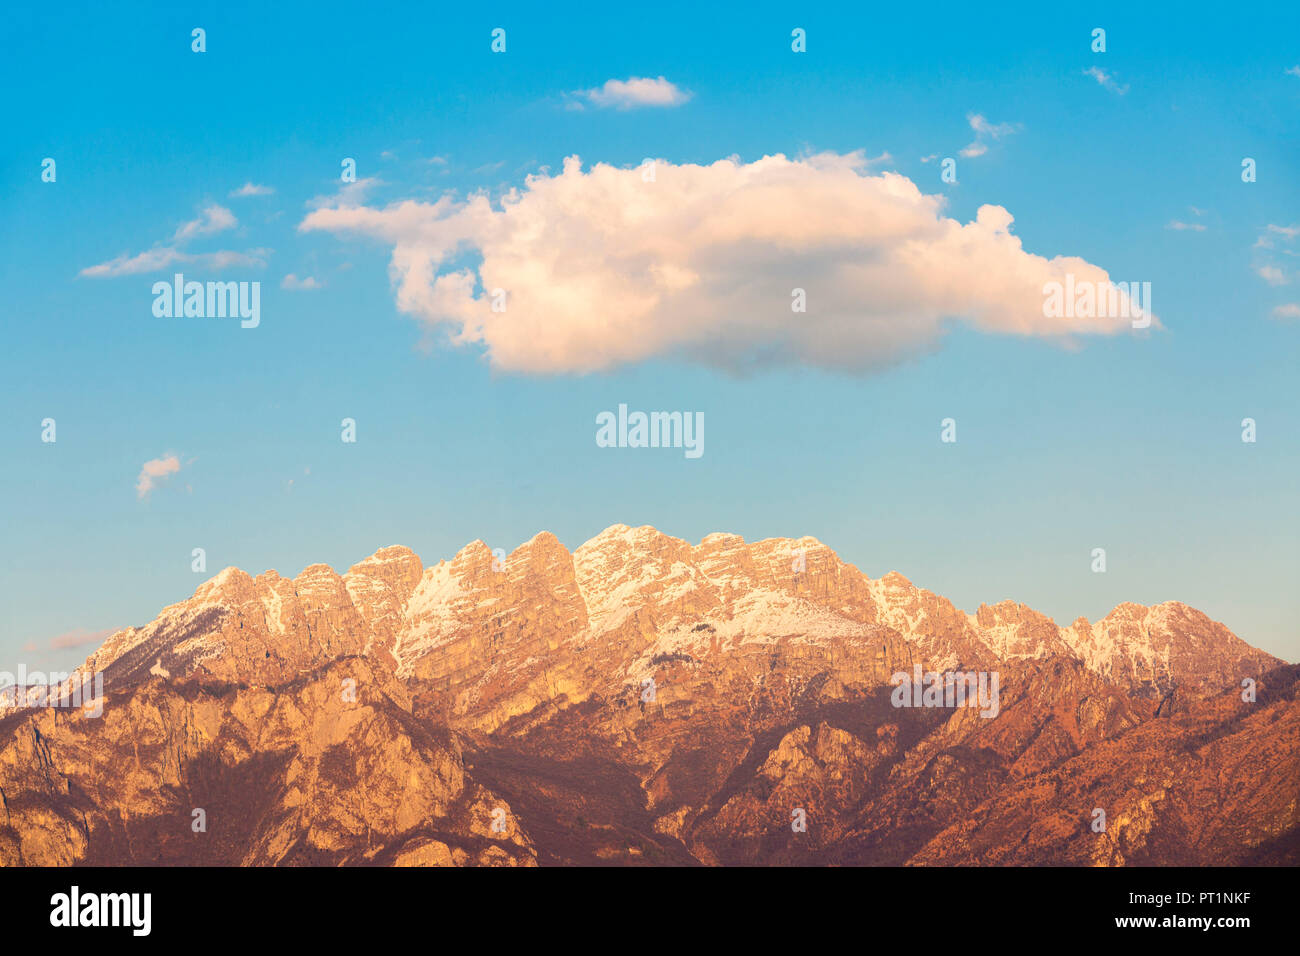 White cloud above Resegone mount at sunset, Lecco, Lecco province, Lombardy, Italy Stock Photo